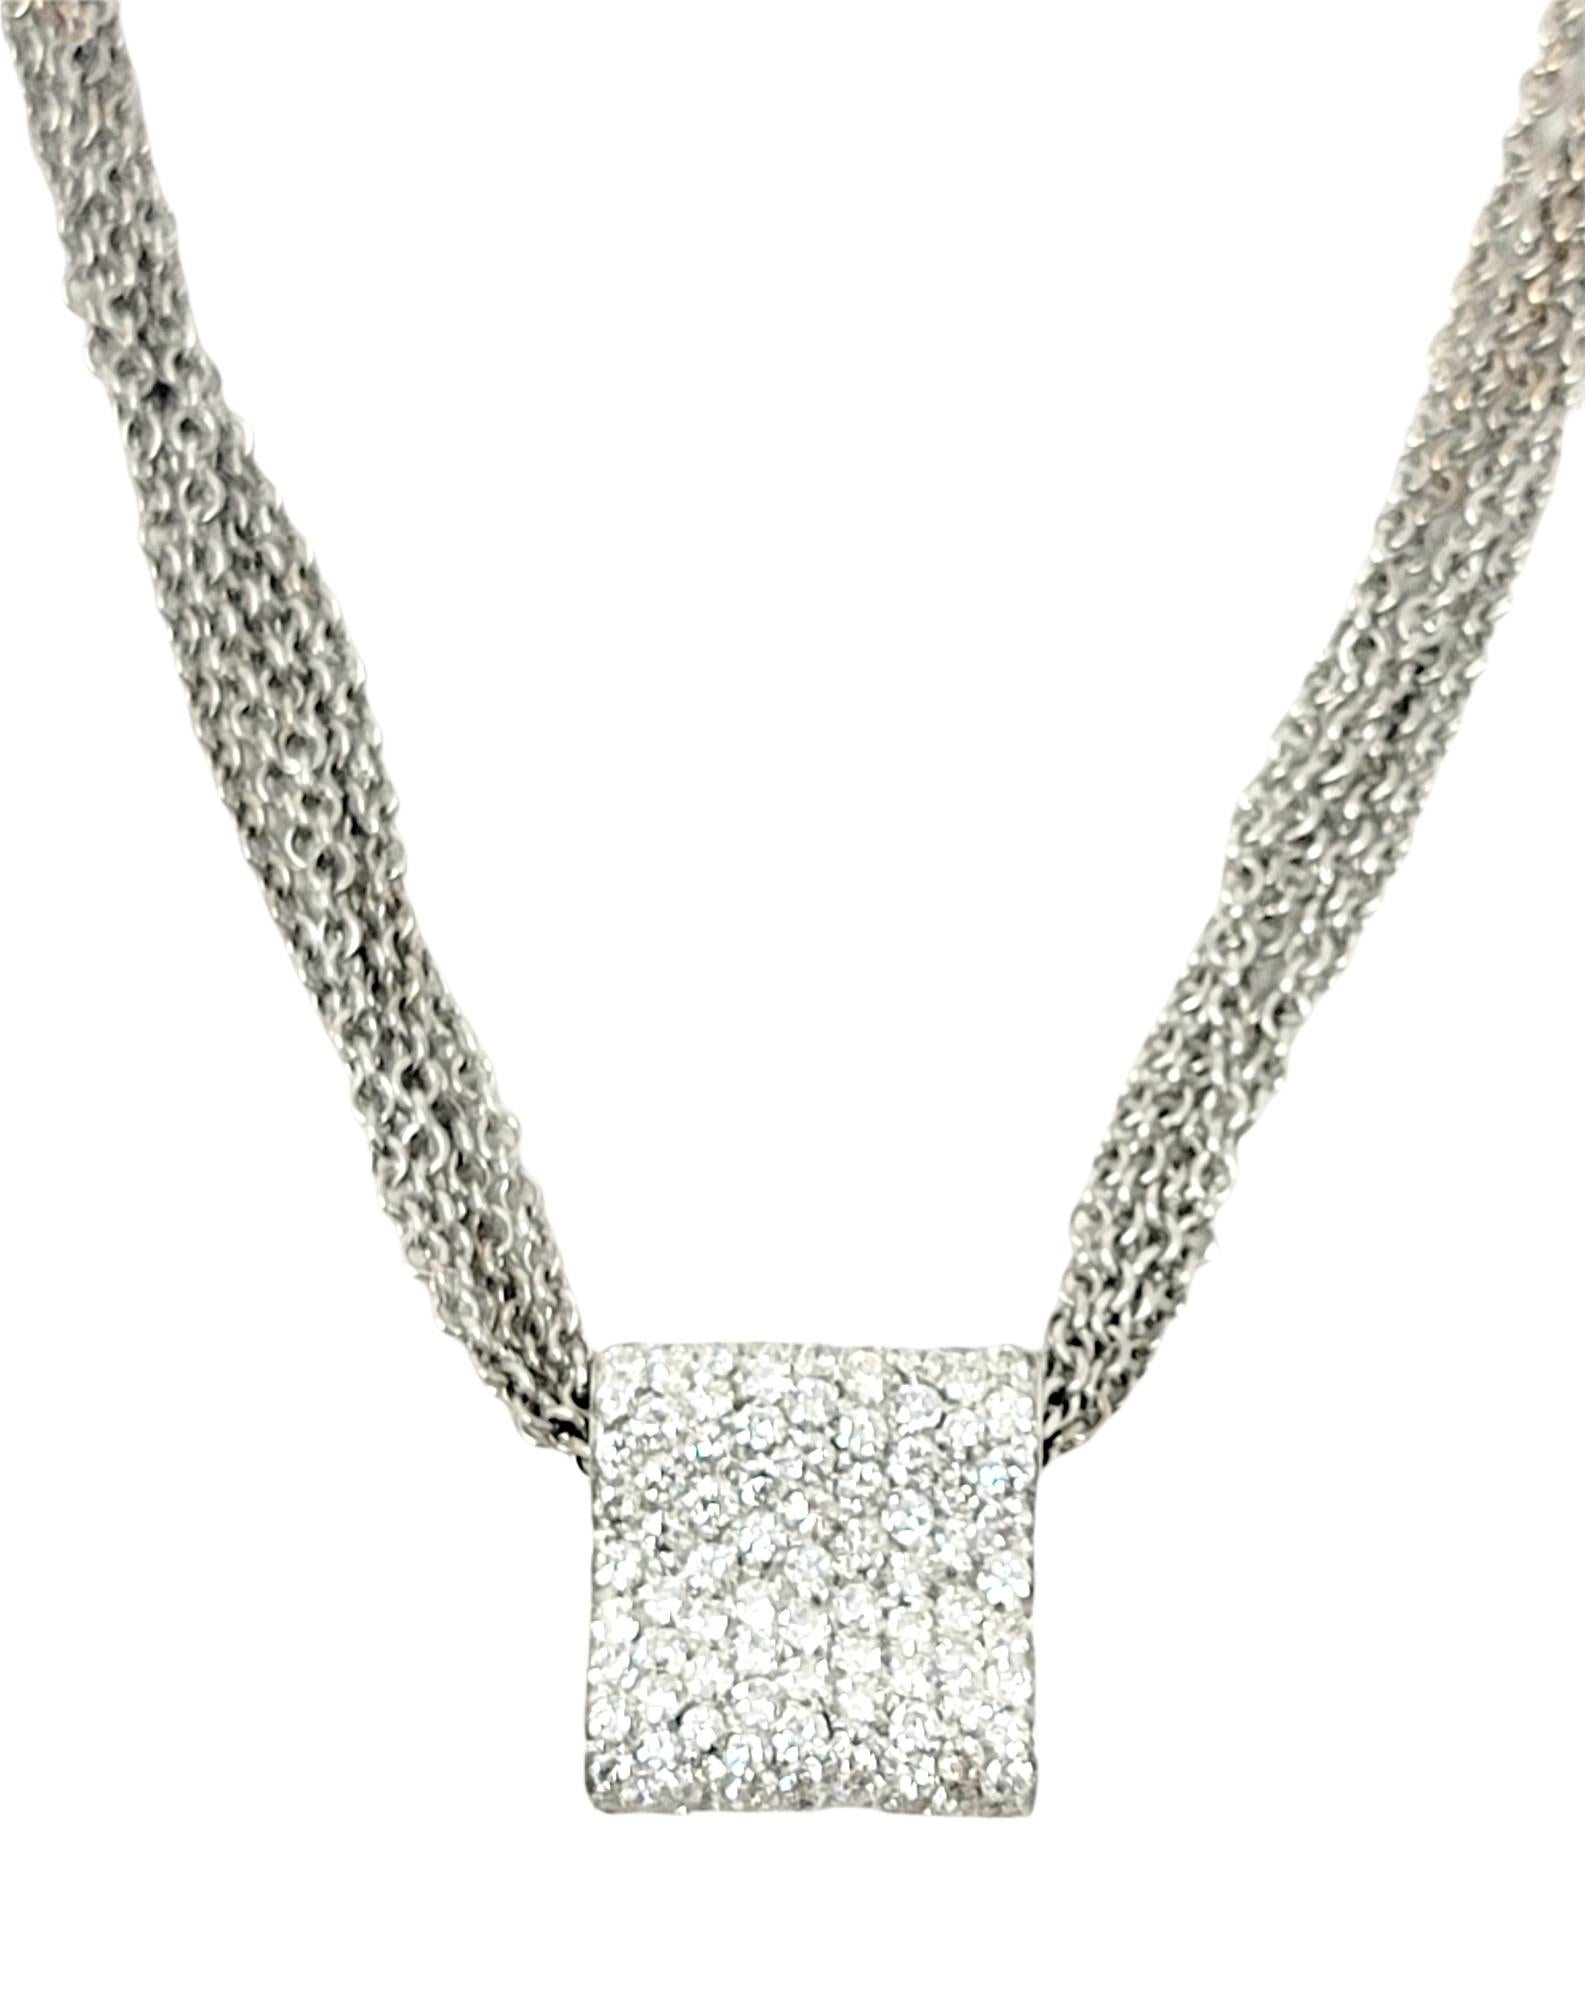 Absolutely stunning pave diamond pendant necklace by jewelry designer, Luca Carati. The contemporary contoured shape of the pendant makes the natural diamonds really shimmer beautifully in the light, while the delicateness of the 5 strand chains